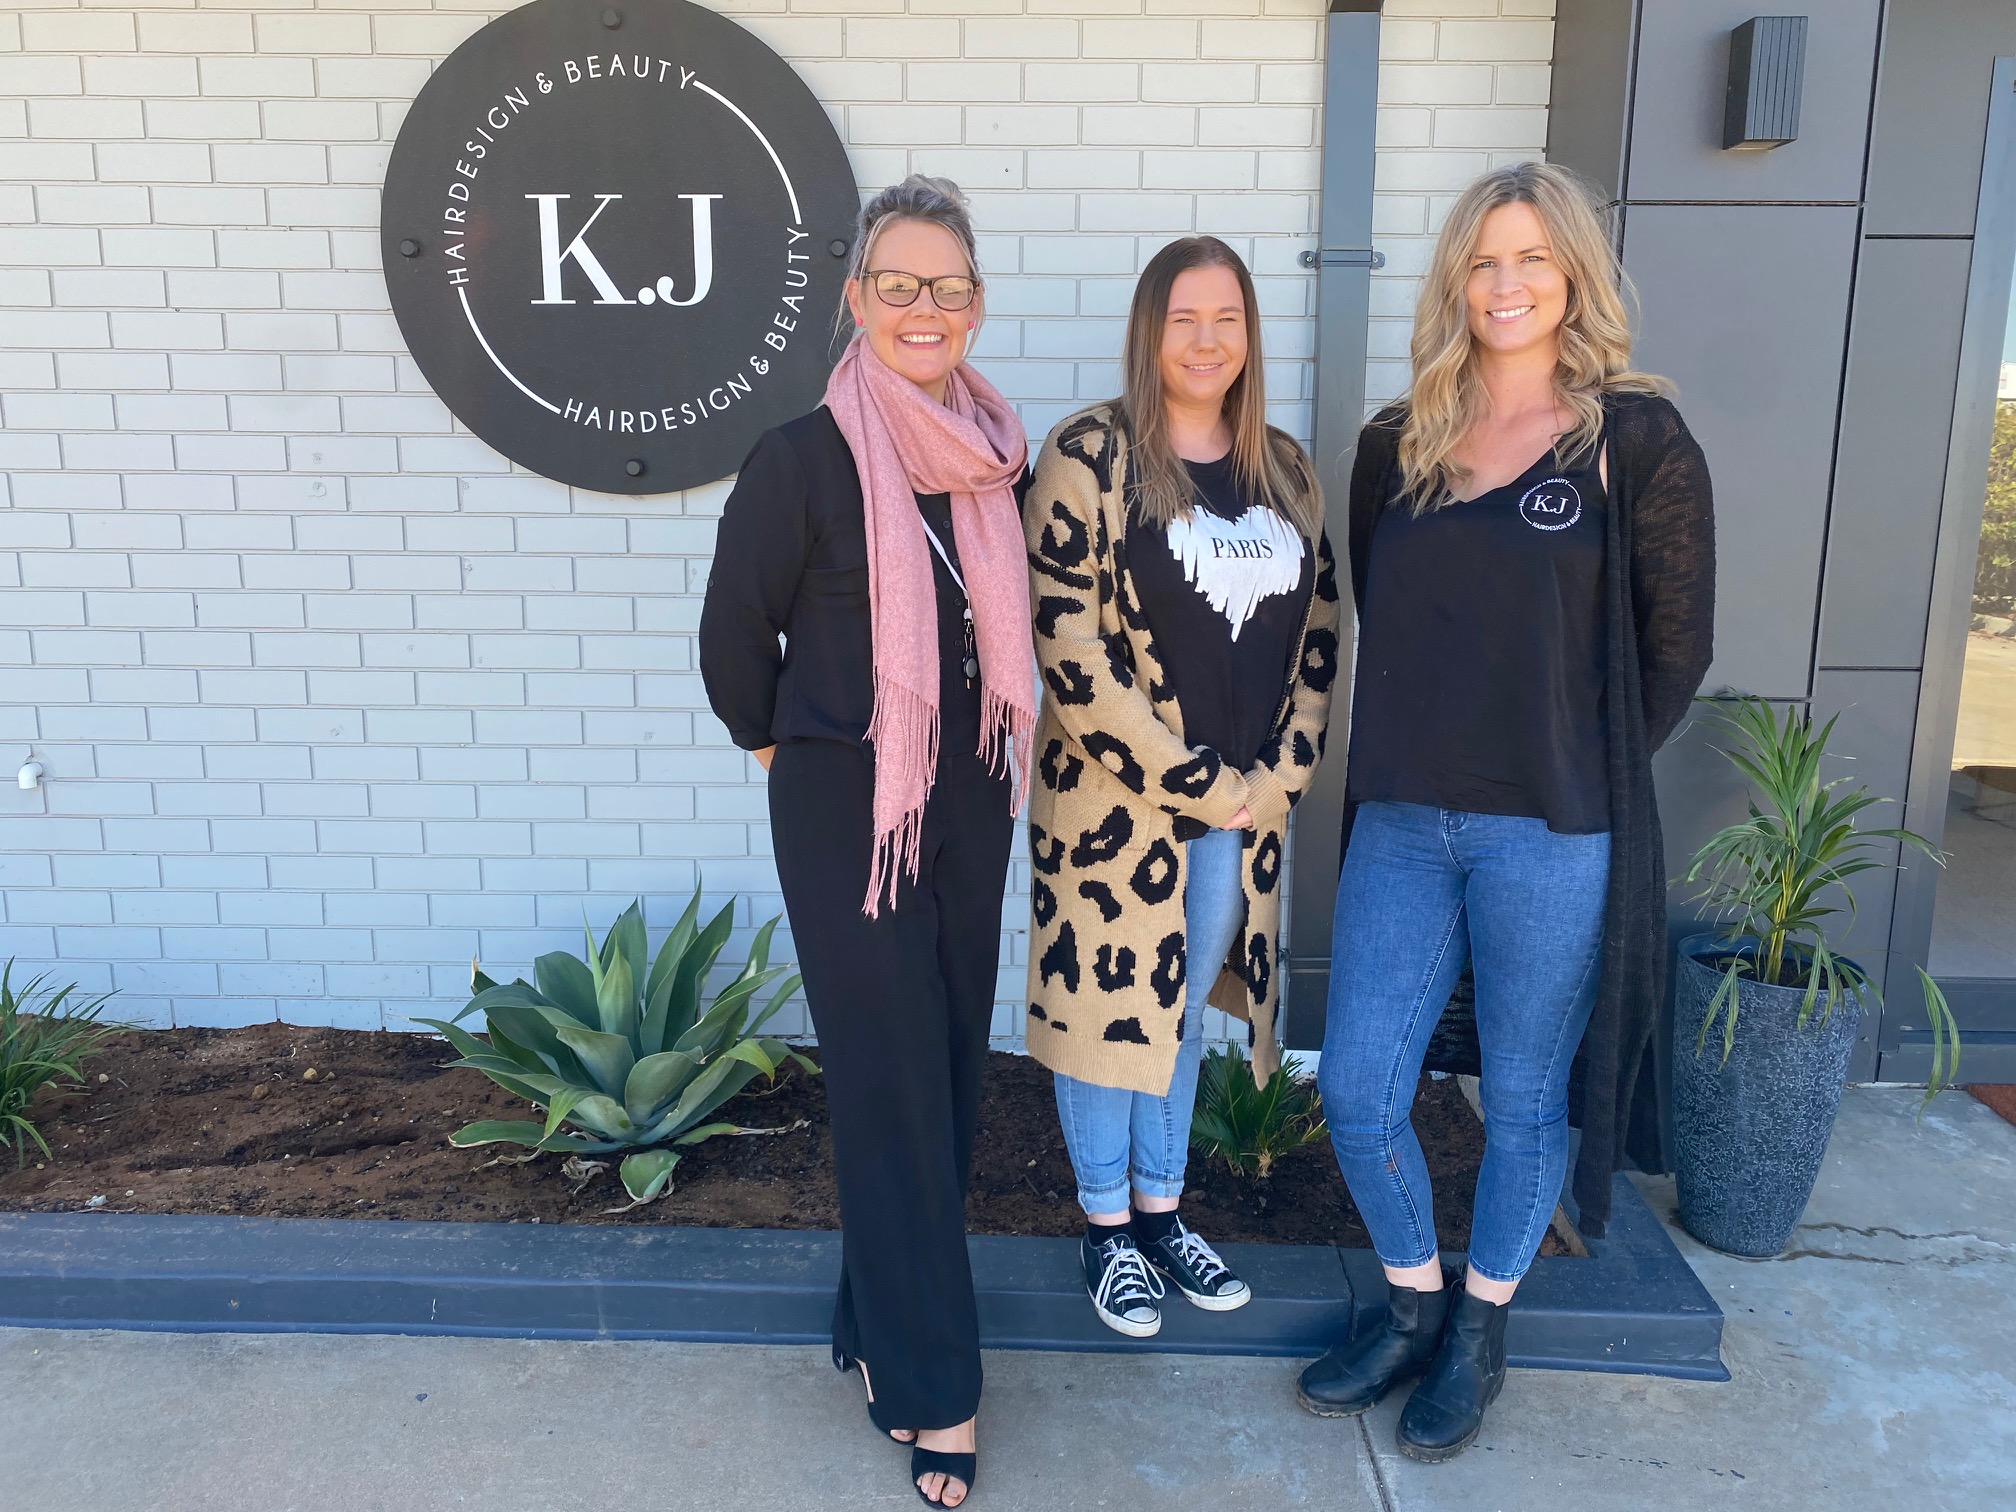 Three women standing in front of a white brick wall with the KJ Hair Designs signage